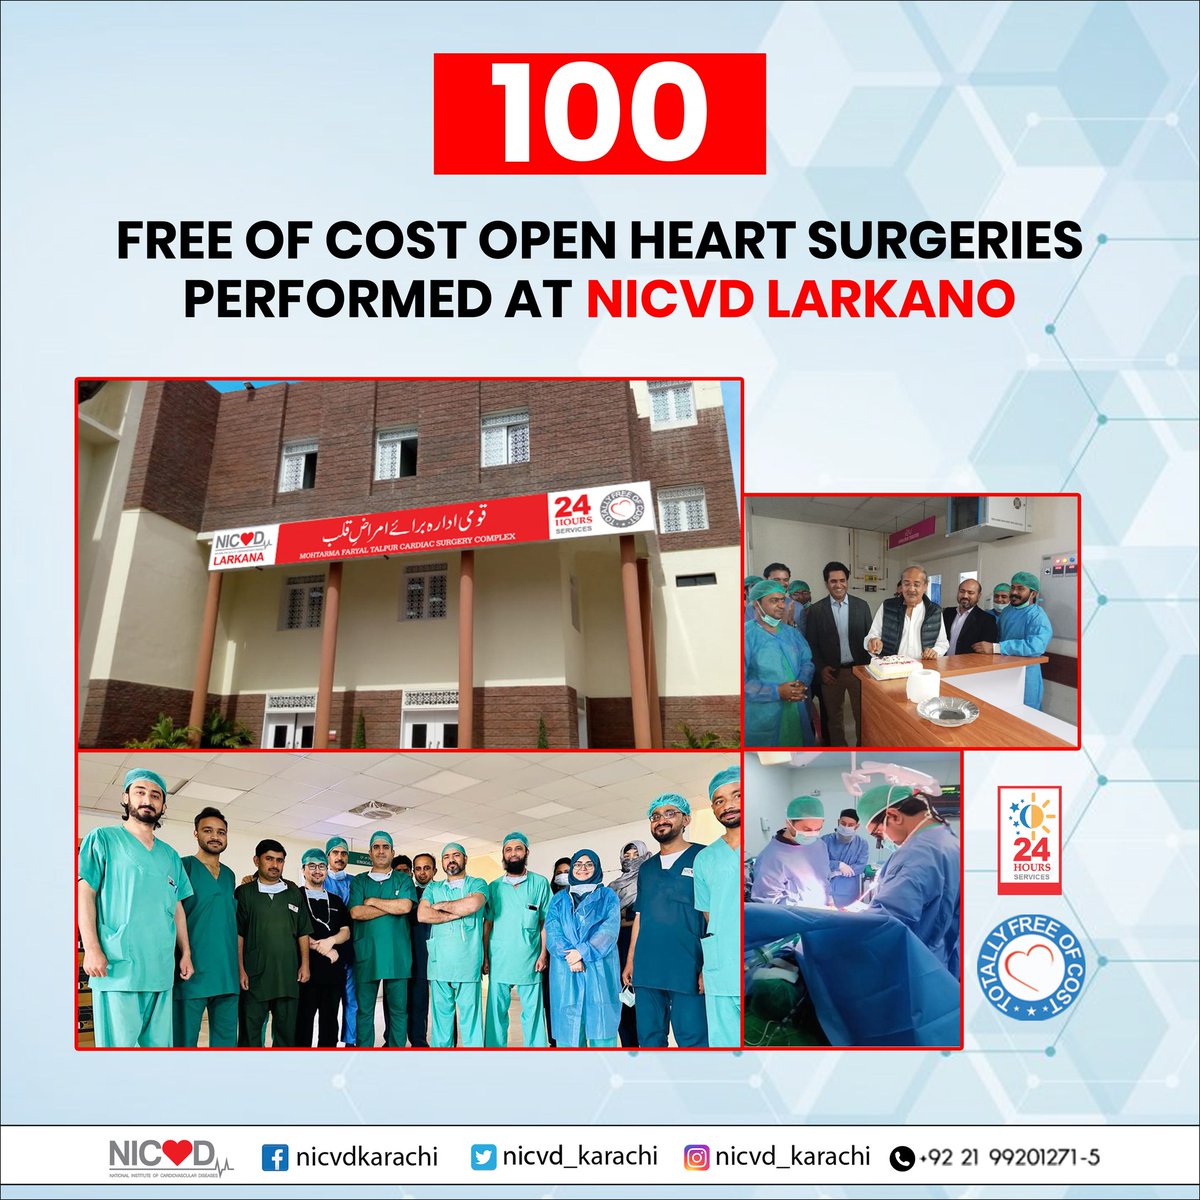 NICVD Larkano team completed 100 successful open-heart surgeries, a testament to our commitment to top-notch cardiac care. Our mission is to provide exceptional healthcare to patients free of cost.
#NICVD #OpenHeartSurgery #FreeOfCost #Larkano